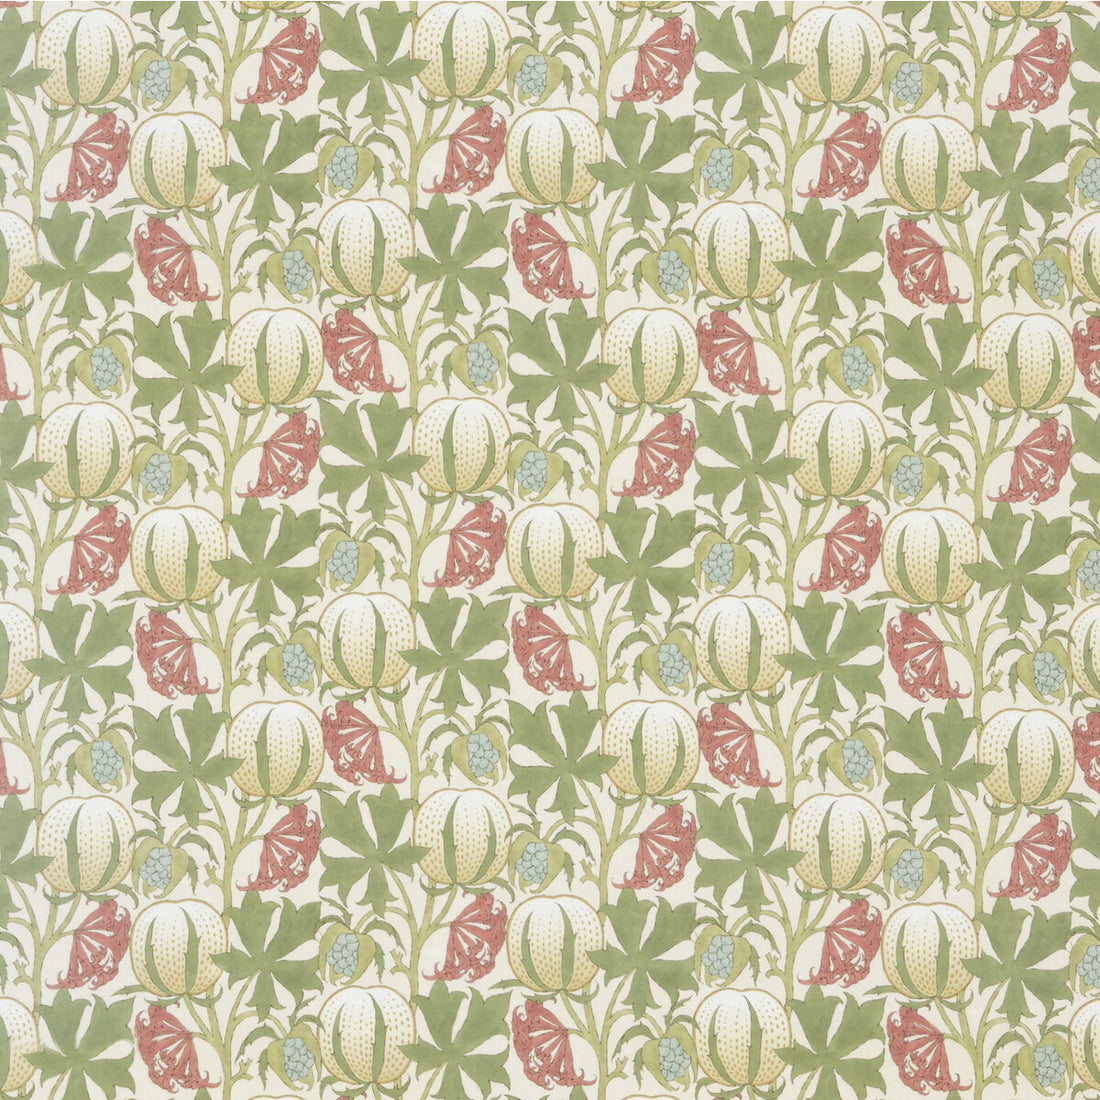 Pumpkins Cotton fabric in coral/green color - pattern BP10973.1.0 - by G P &amp; J Baker in the Original Brantwood Fabric collection